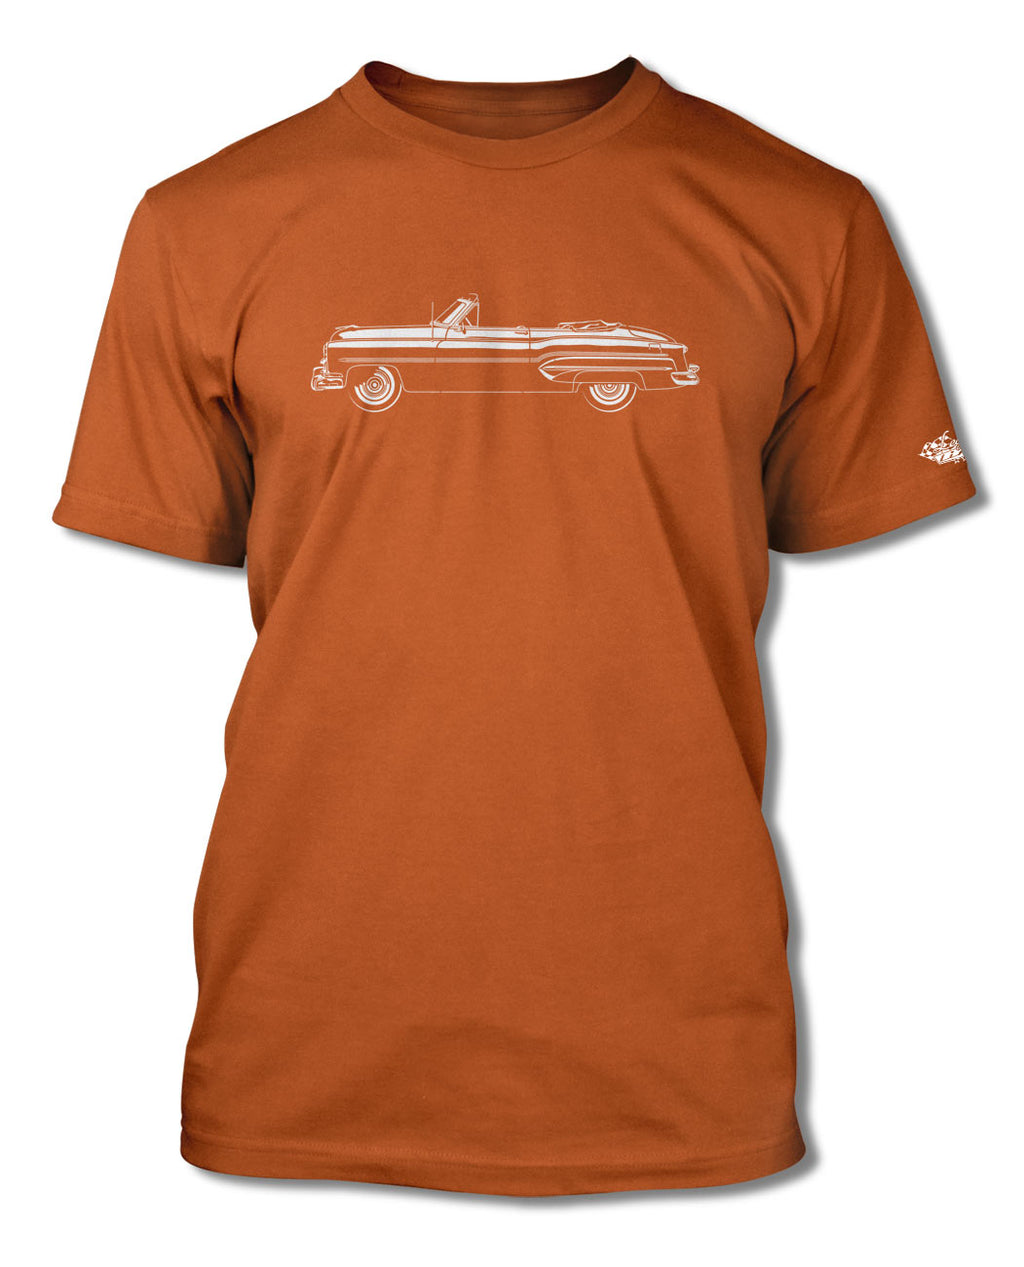 1951 Oldsmobile 98 Deluxe Convertible T-Shirt - Men - Side View